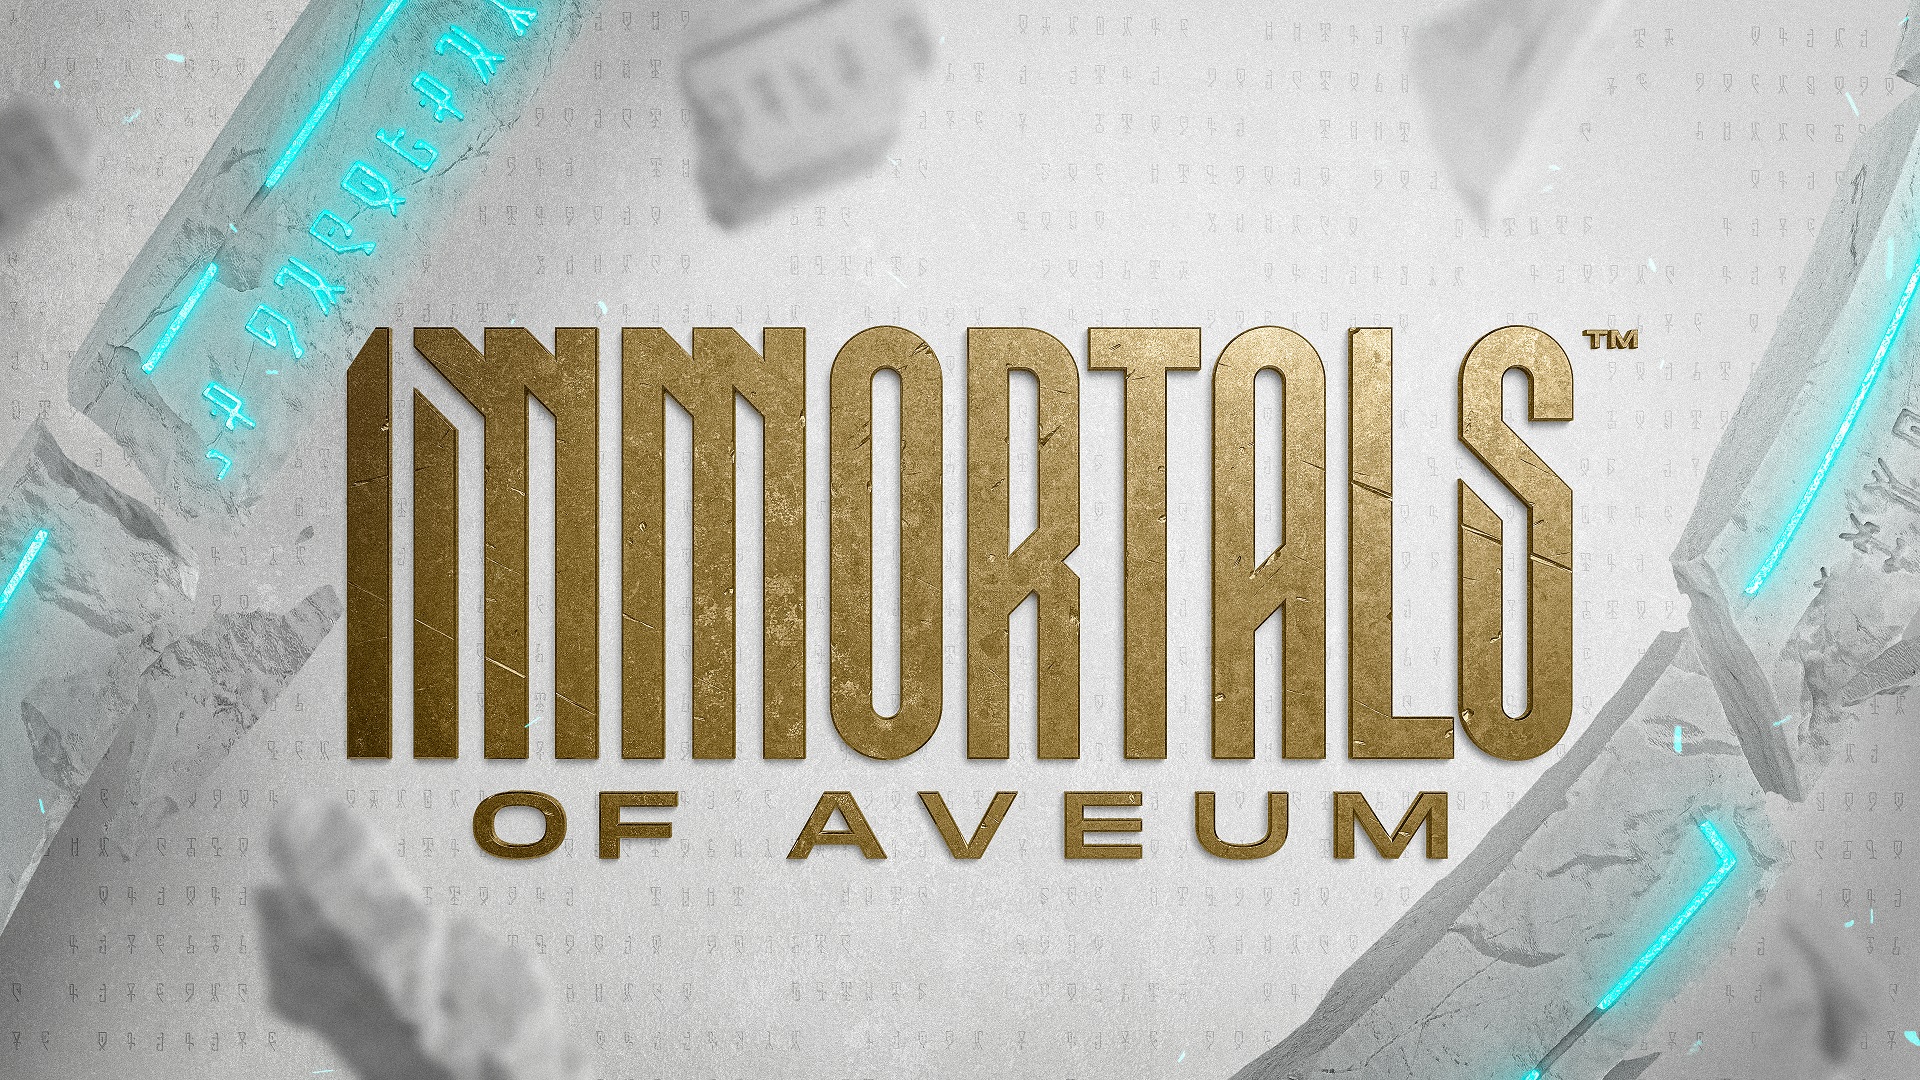 Immortals of Aveum chapters list